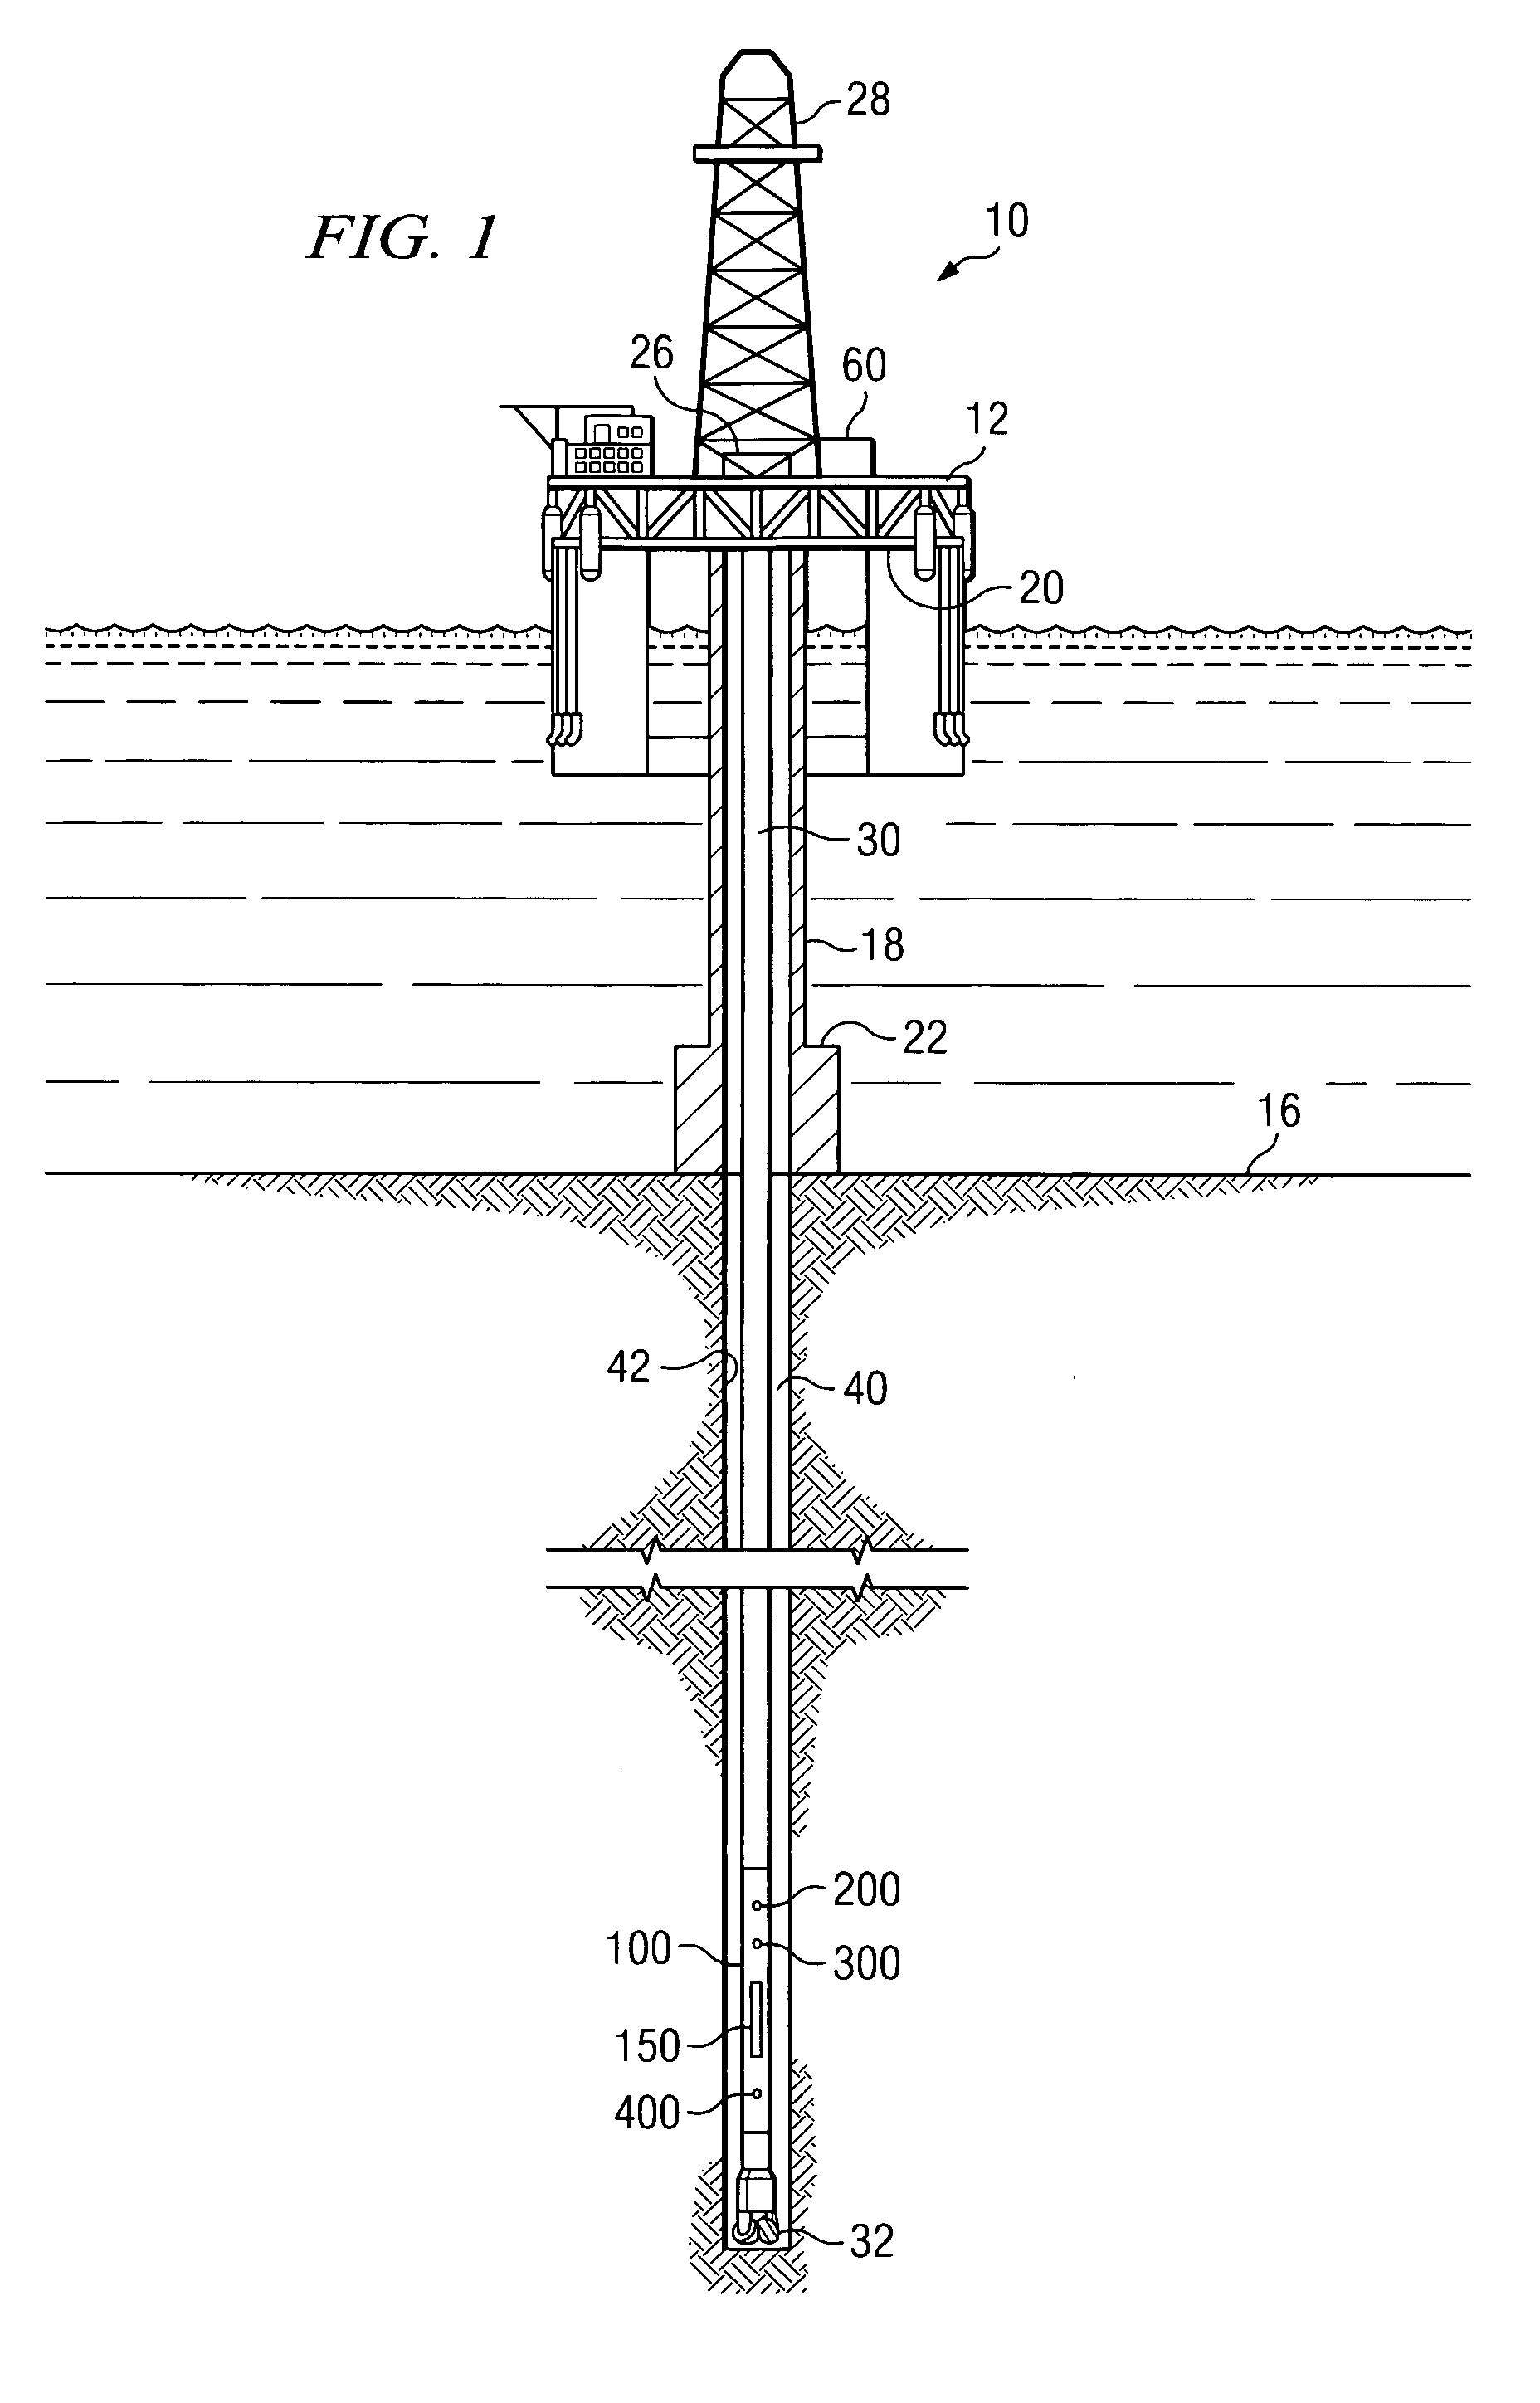 Rotary steerable tool including drill string rotation measurement apparatus